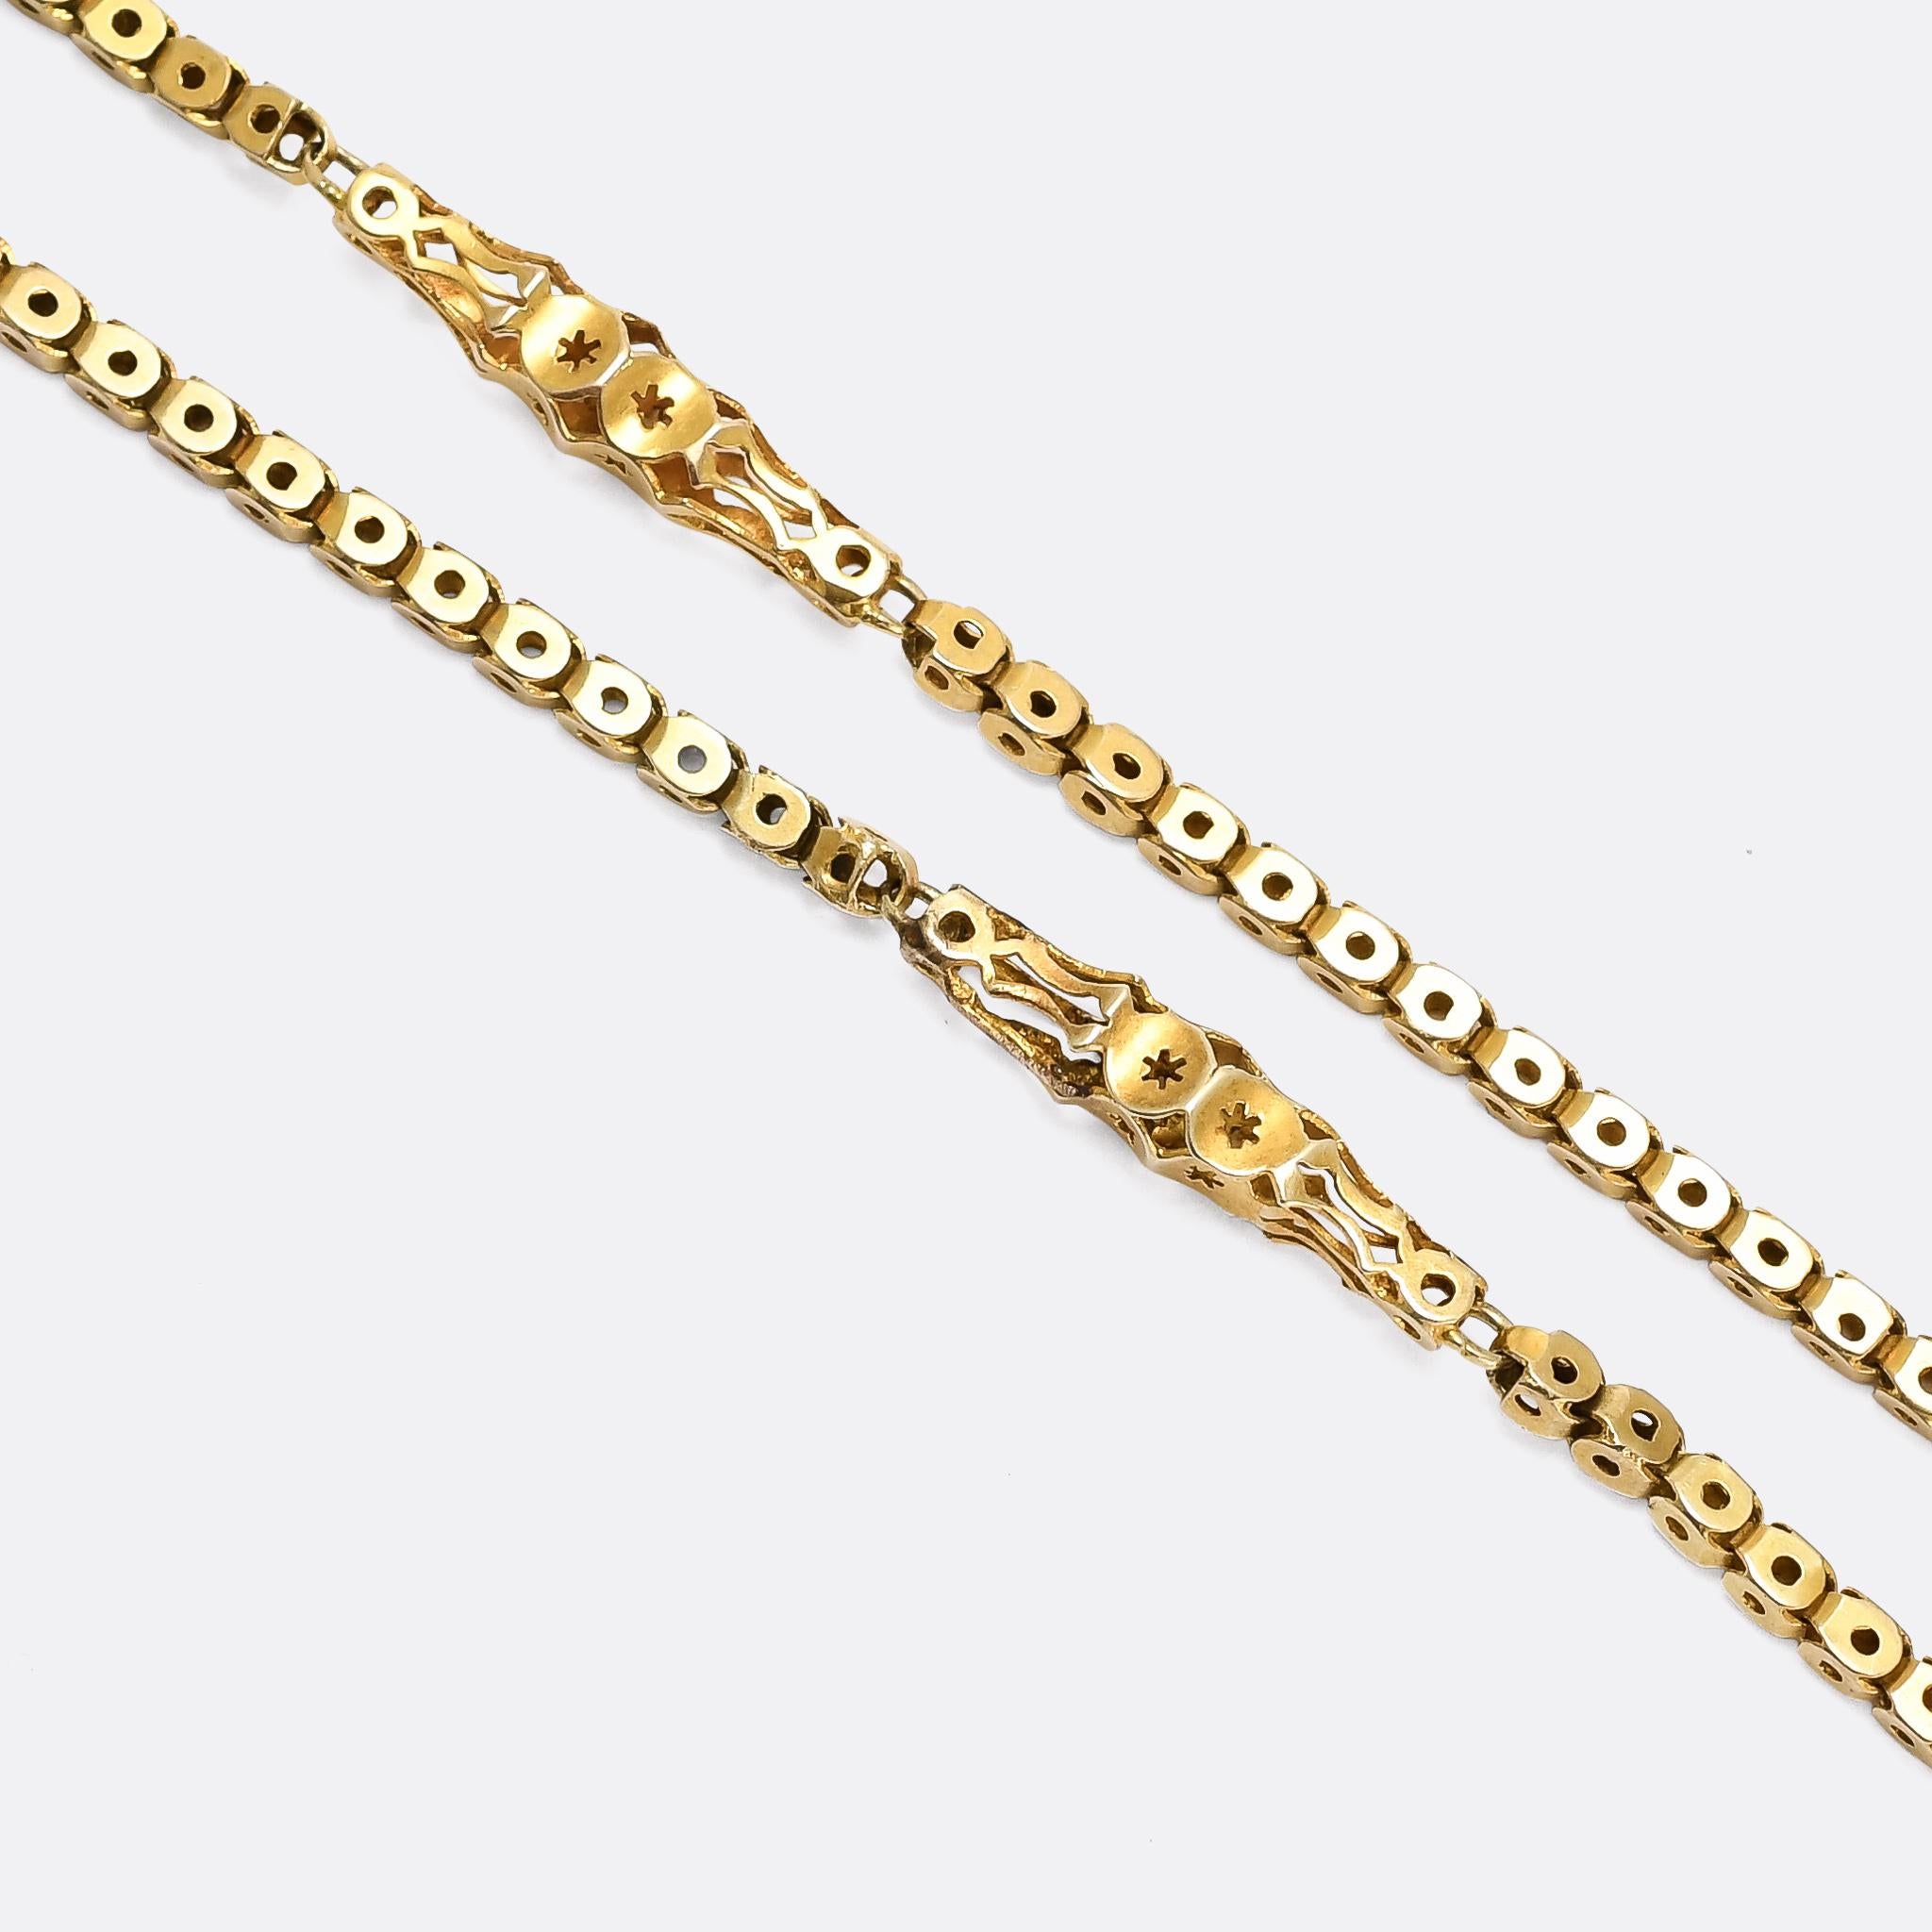 A beautifully made fancy link 46 inch guard chain dating from the late Victorian period, circa 1890. It's modelled in 9 karat gold throughout, and comprises box links and longer, pierced divider sections - all finely handmade and remaining in great